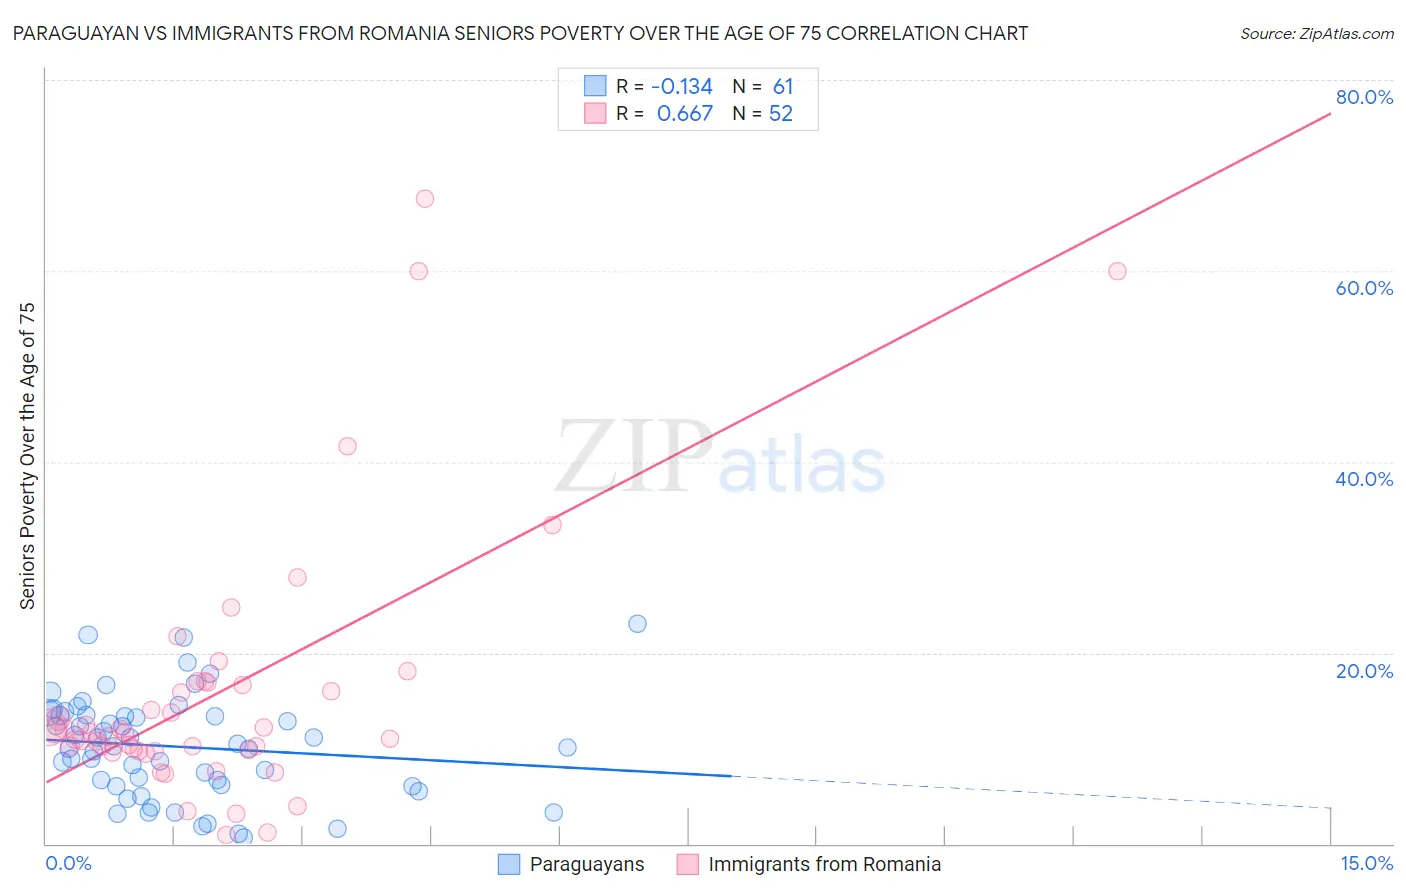 Paraguayan vs Immigrants from Romania Seniors Poverty Over the Age of 75